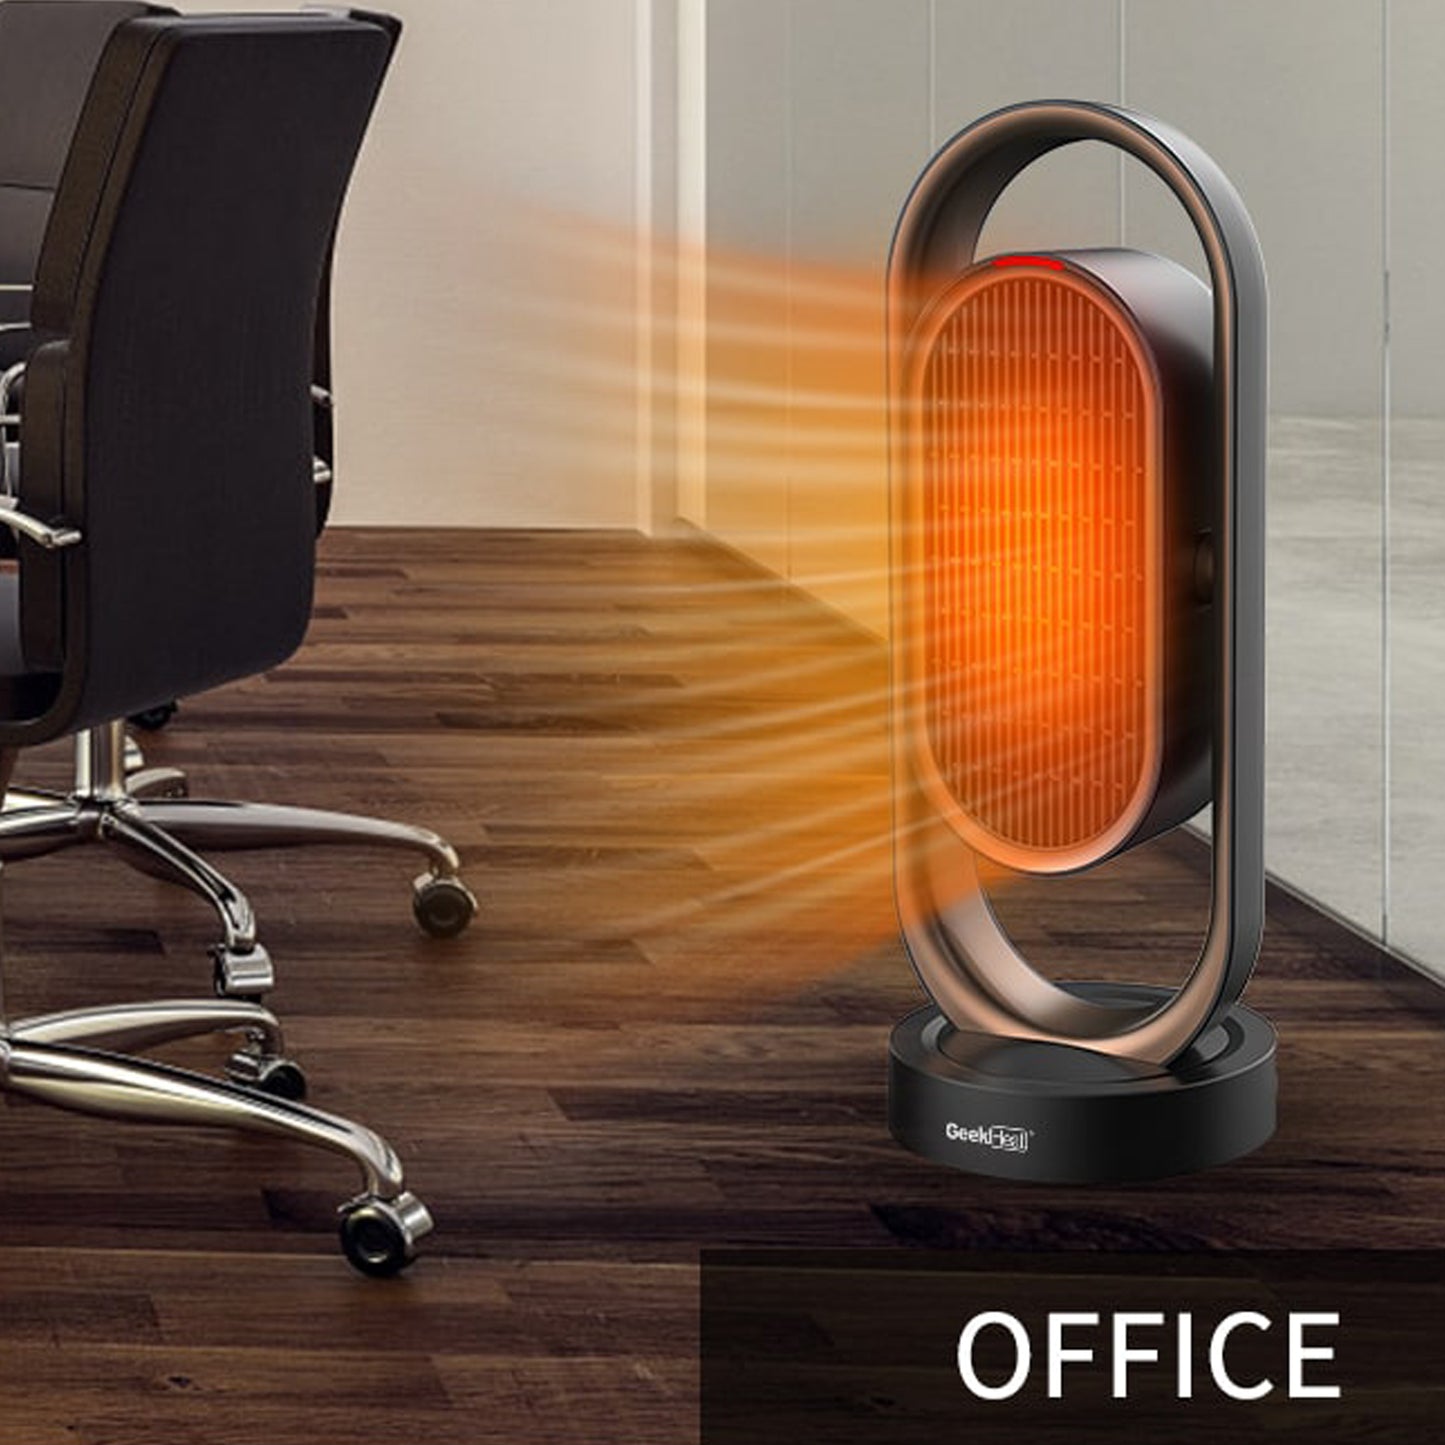 1500W Fast Heating Heater, Portable Space Heater for Indoor Use, W/ Dual Oscillating, Tip-Over Protection, 8H Time, Heating and Fan Modes, Tower Ceramic Heater for Living Room, Bedroom, Office, C18